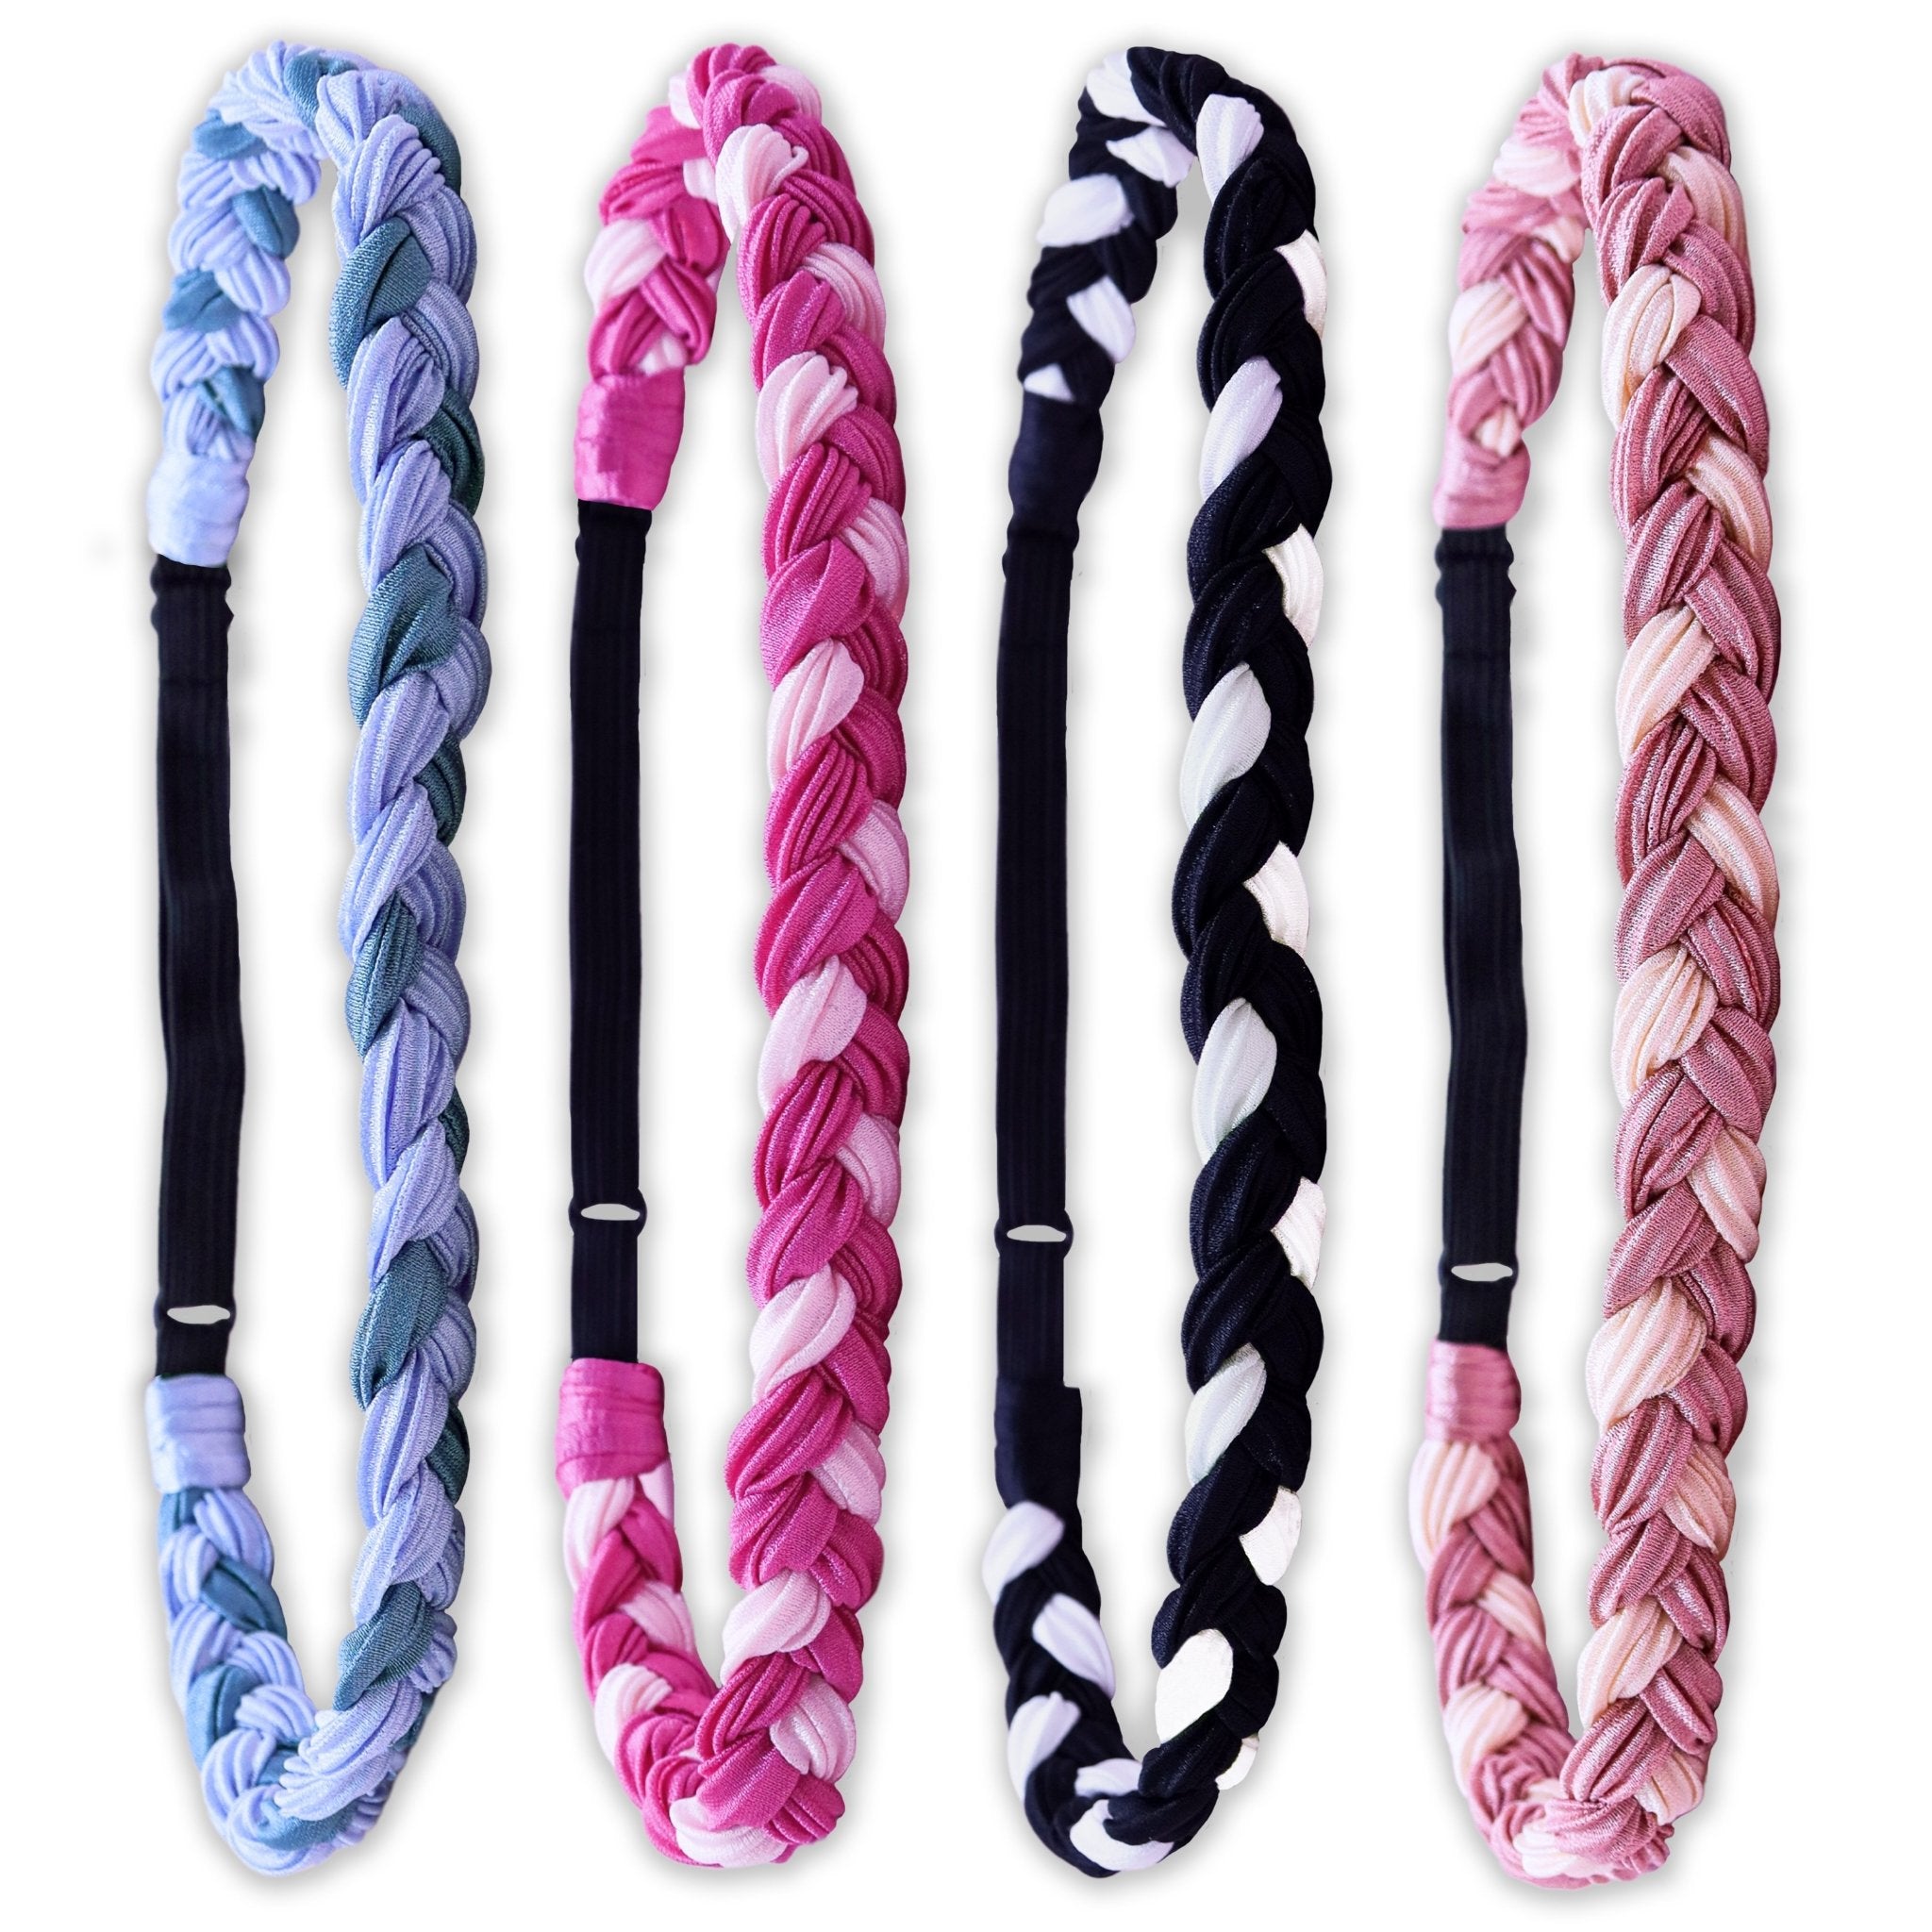 Adjustable Two Tone Braided Headbands - 4 Pack